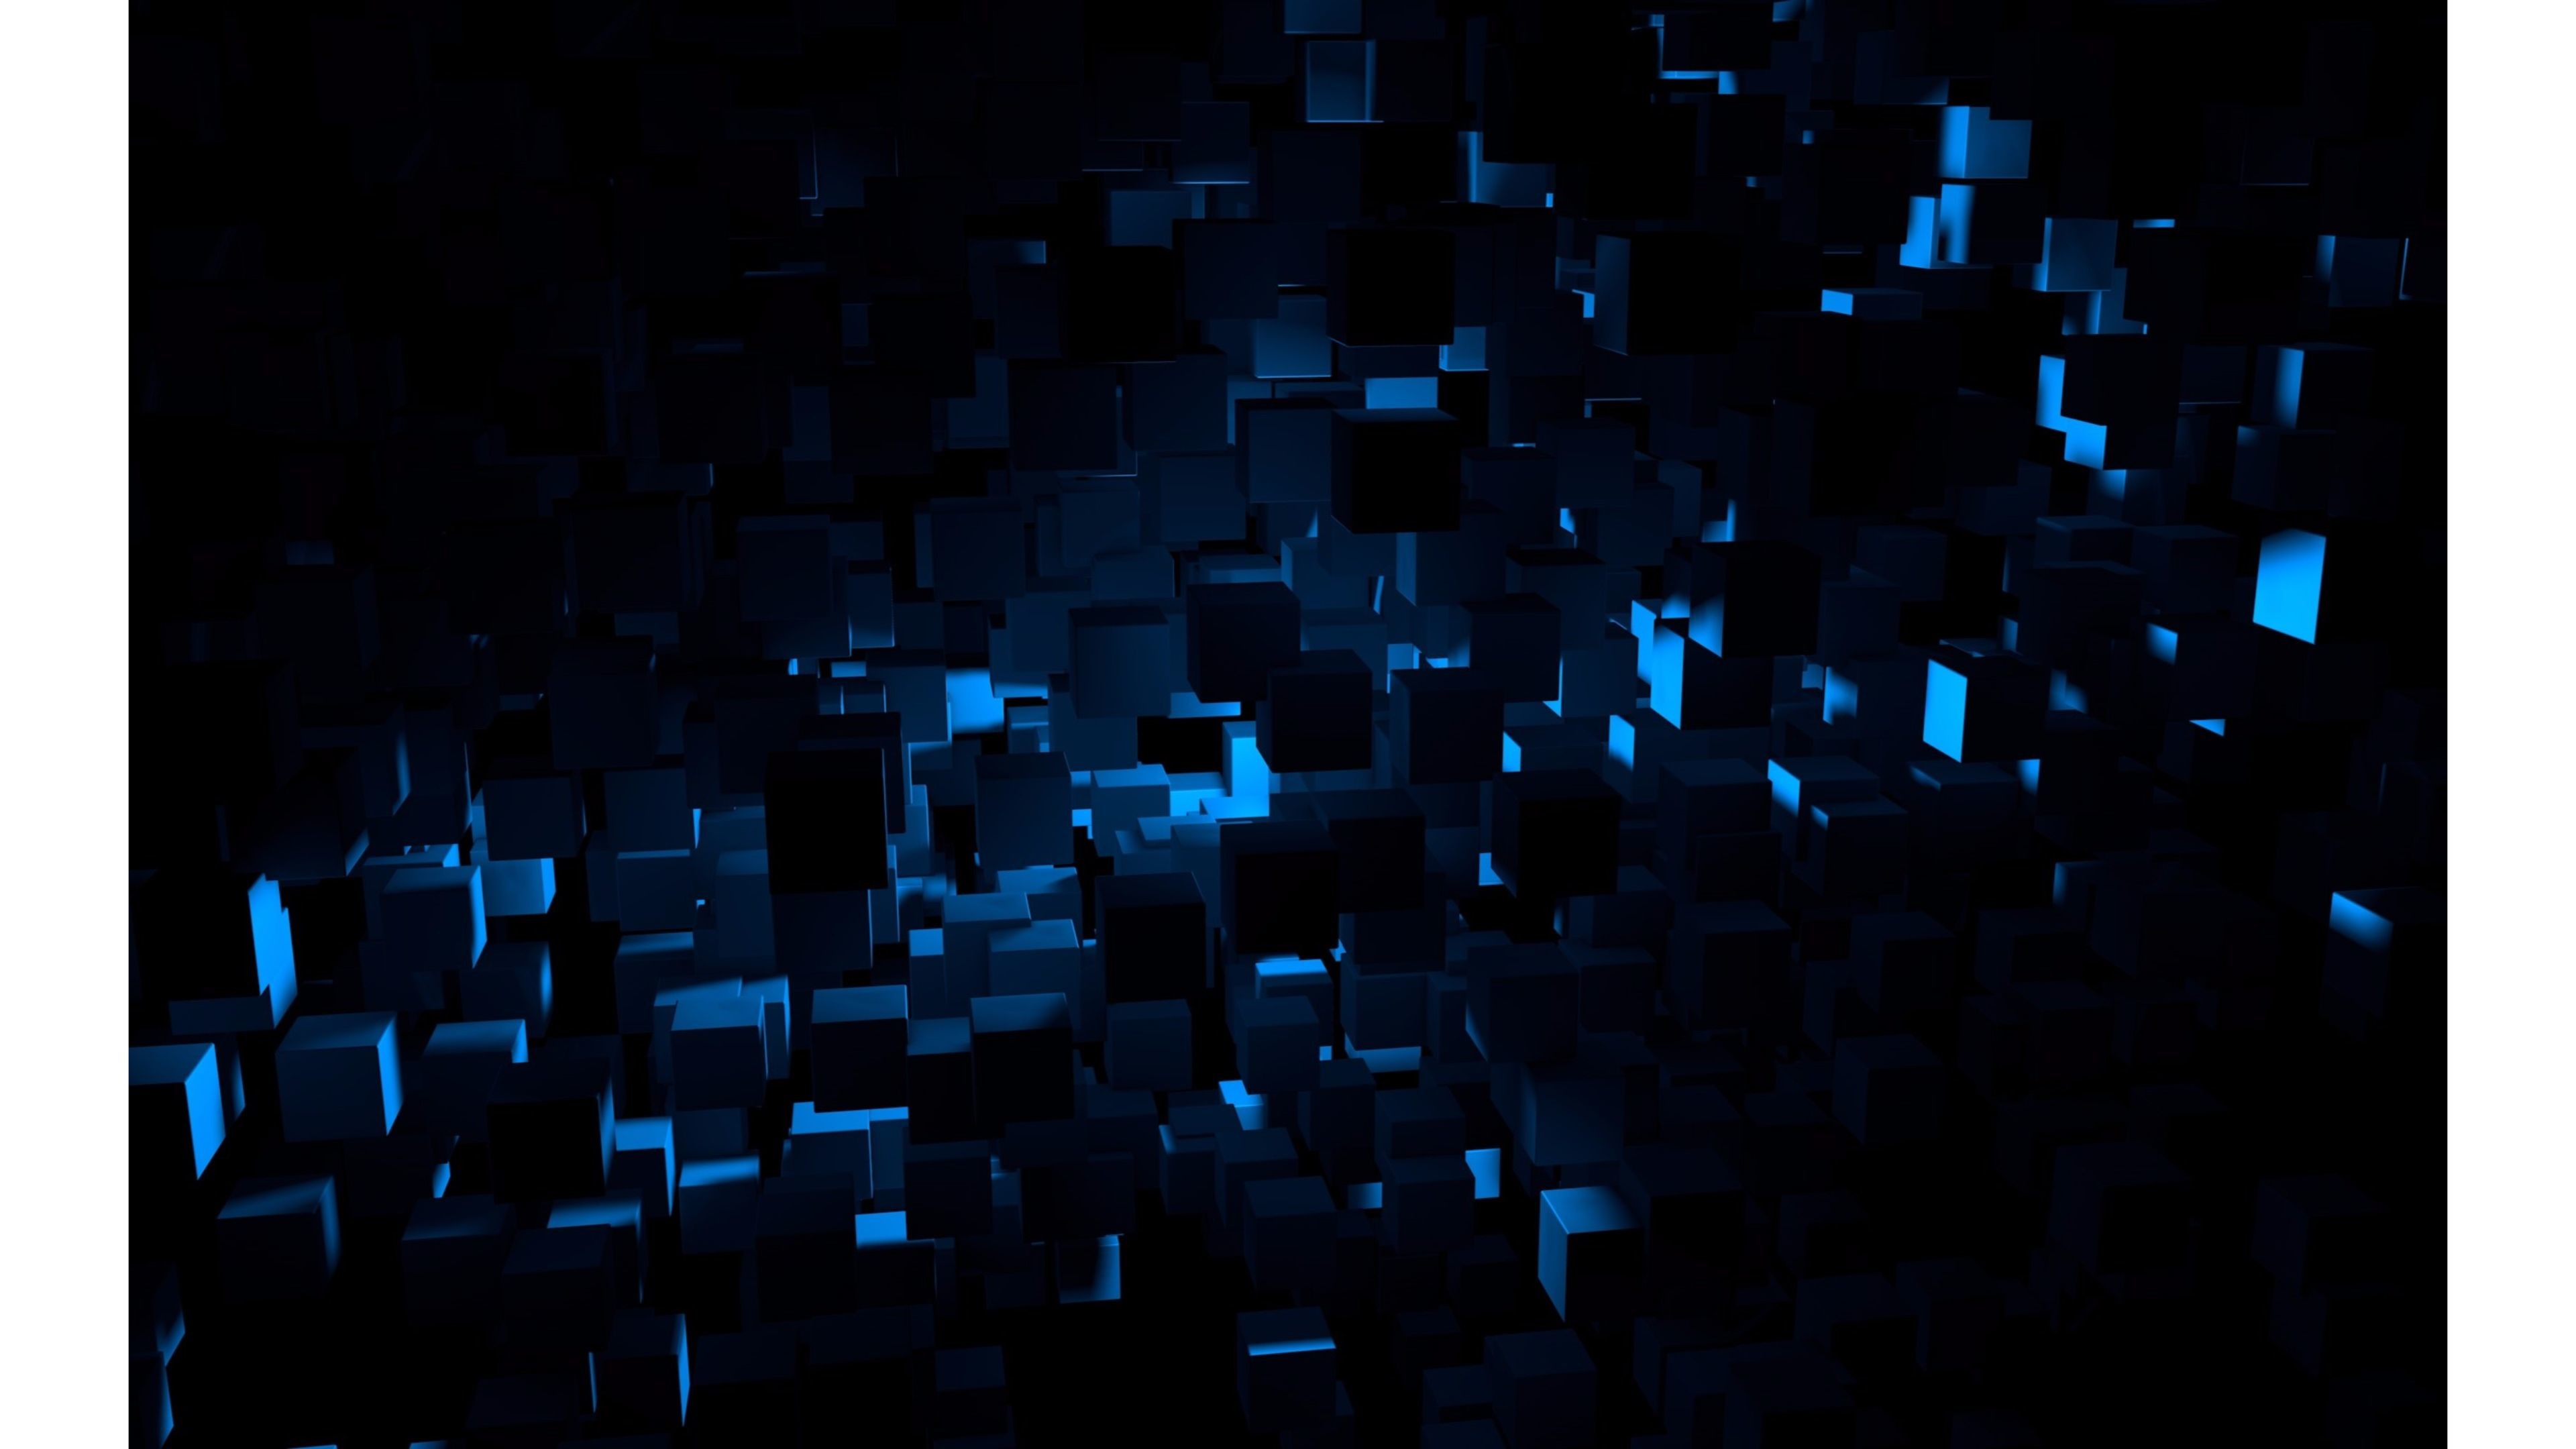 … Wallpapers 4k Abstract Wallpaper Blue And Black 4K | Free Widescreen Hd abstract  wallpaper …